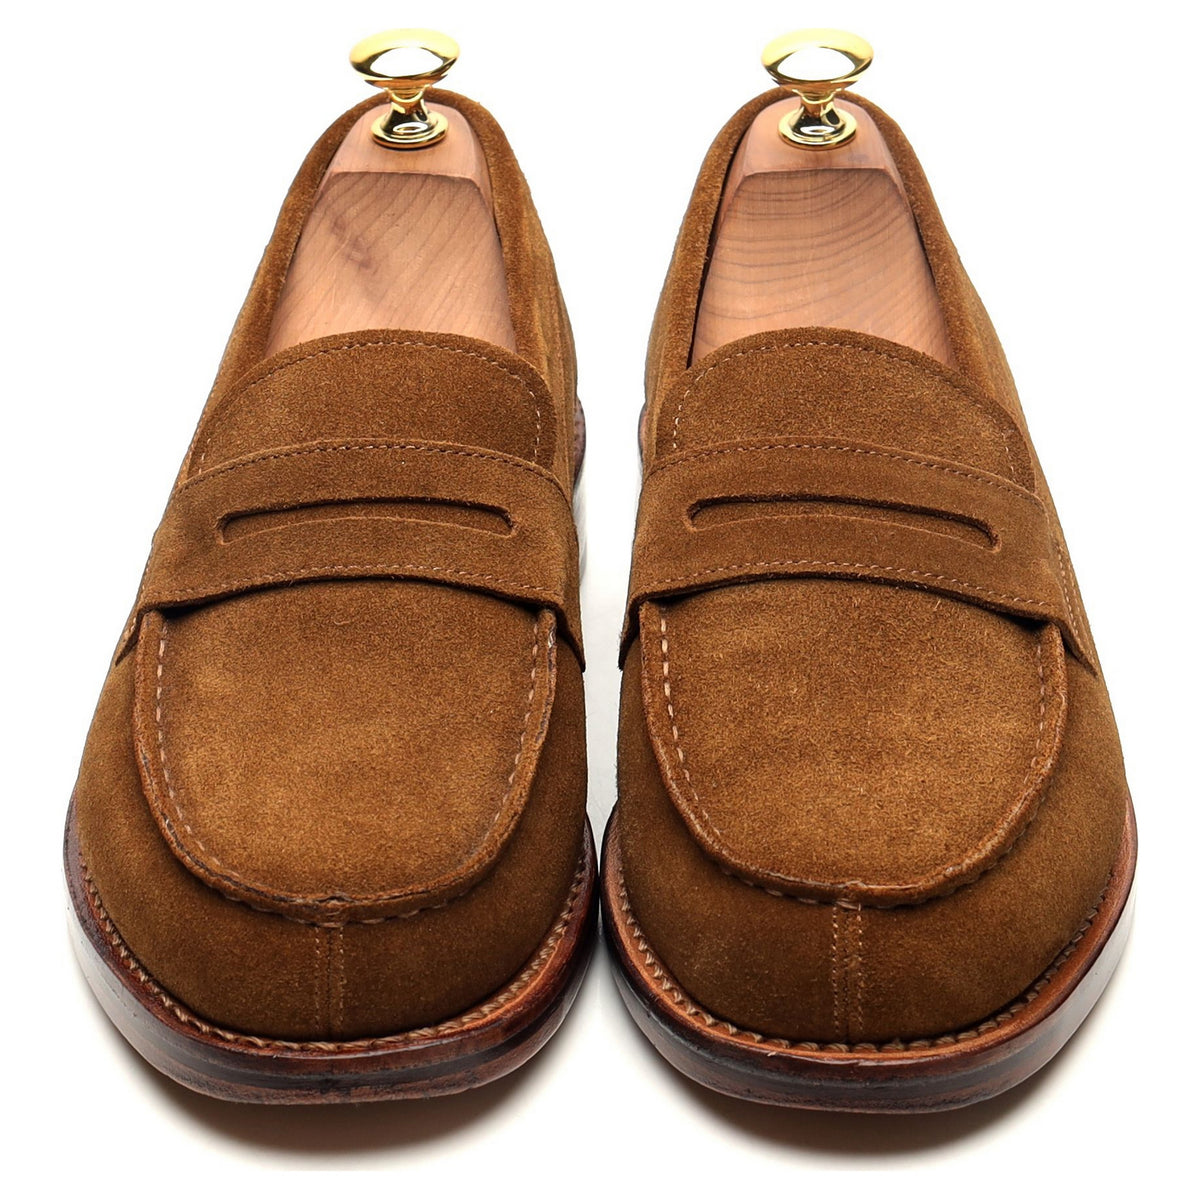 &#39;Peter&#39; Snuff Brown Suede Loafers UK 6.5 E